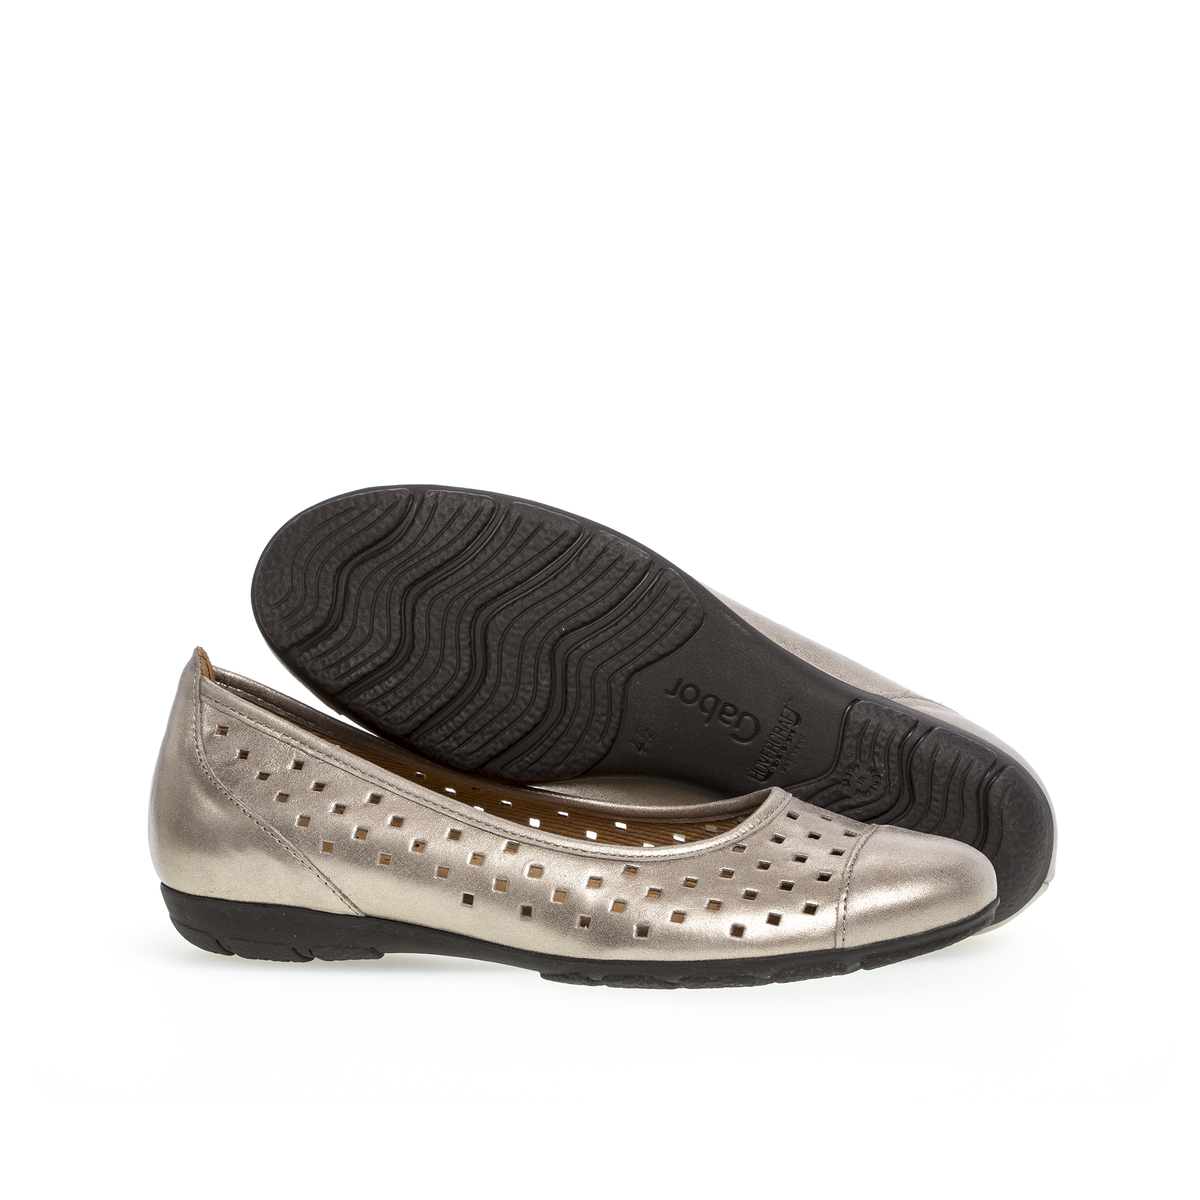 Gabor Shoes USA Style: 44.169.62